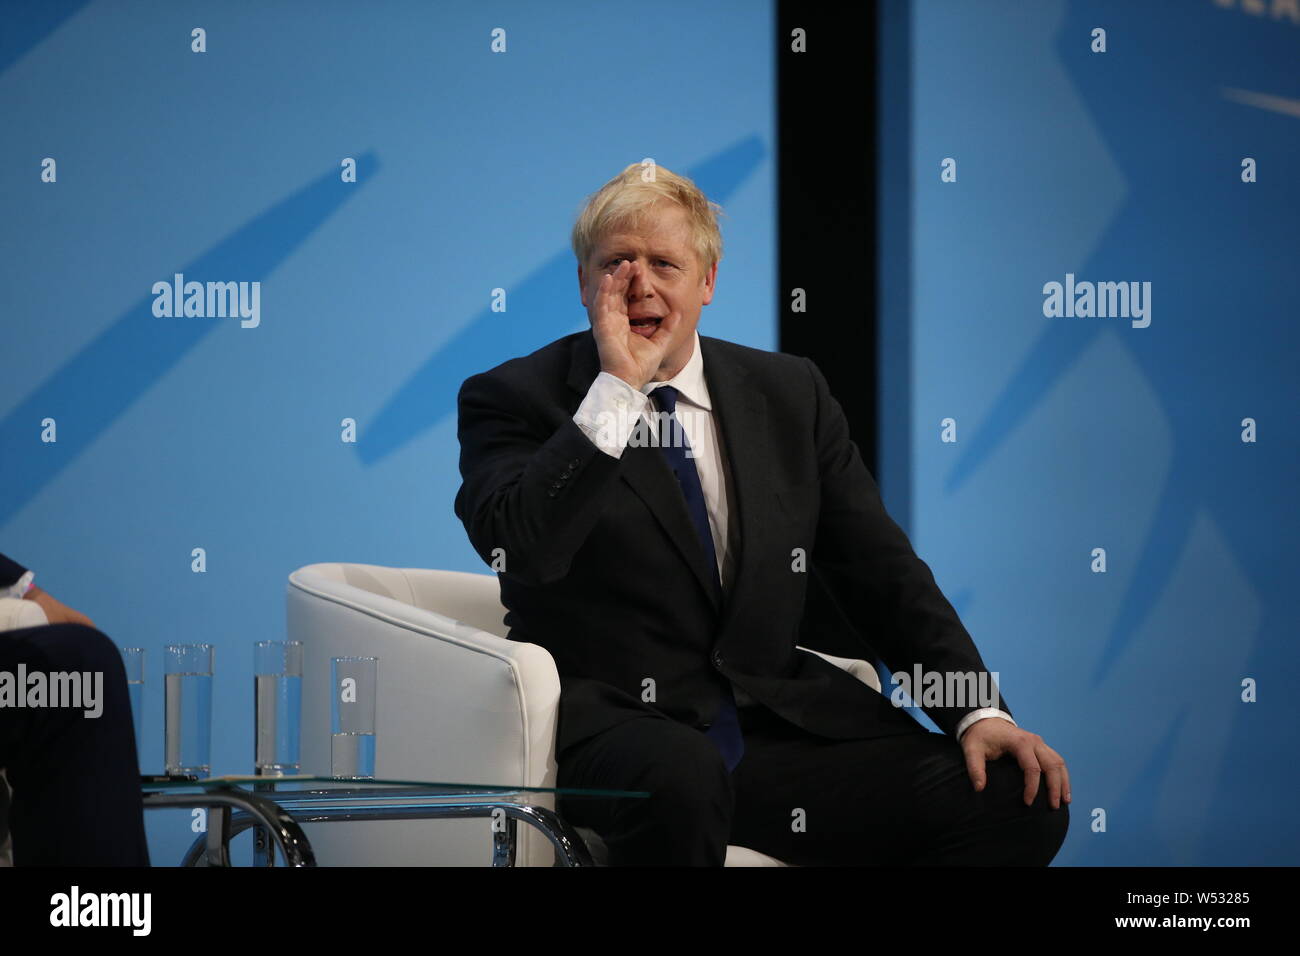 Boris Johnson takes part in the final Conservative Party leadership hustings at the London Excel Centre on July 17th 2019. Stock Photo